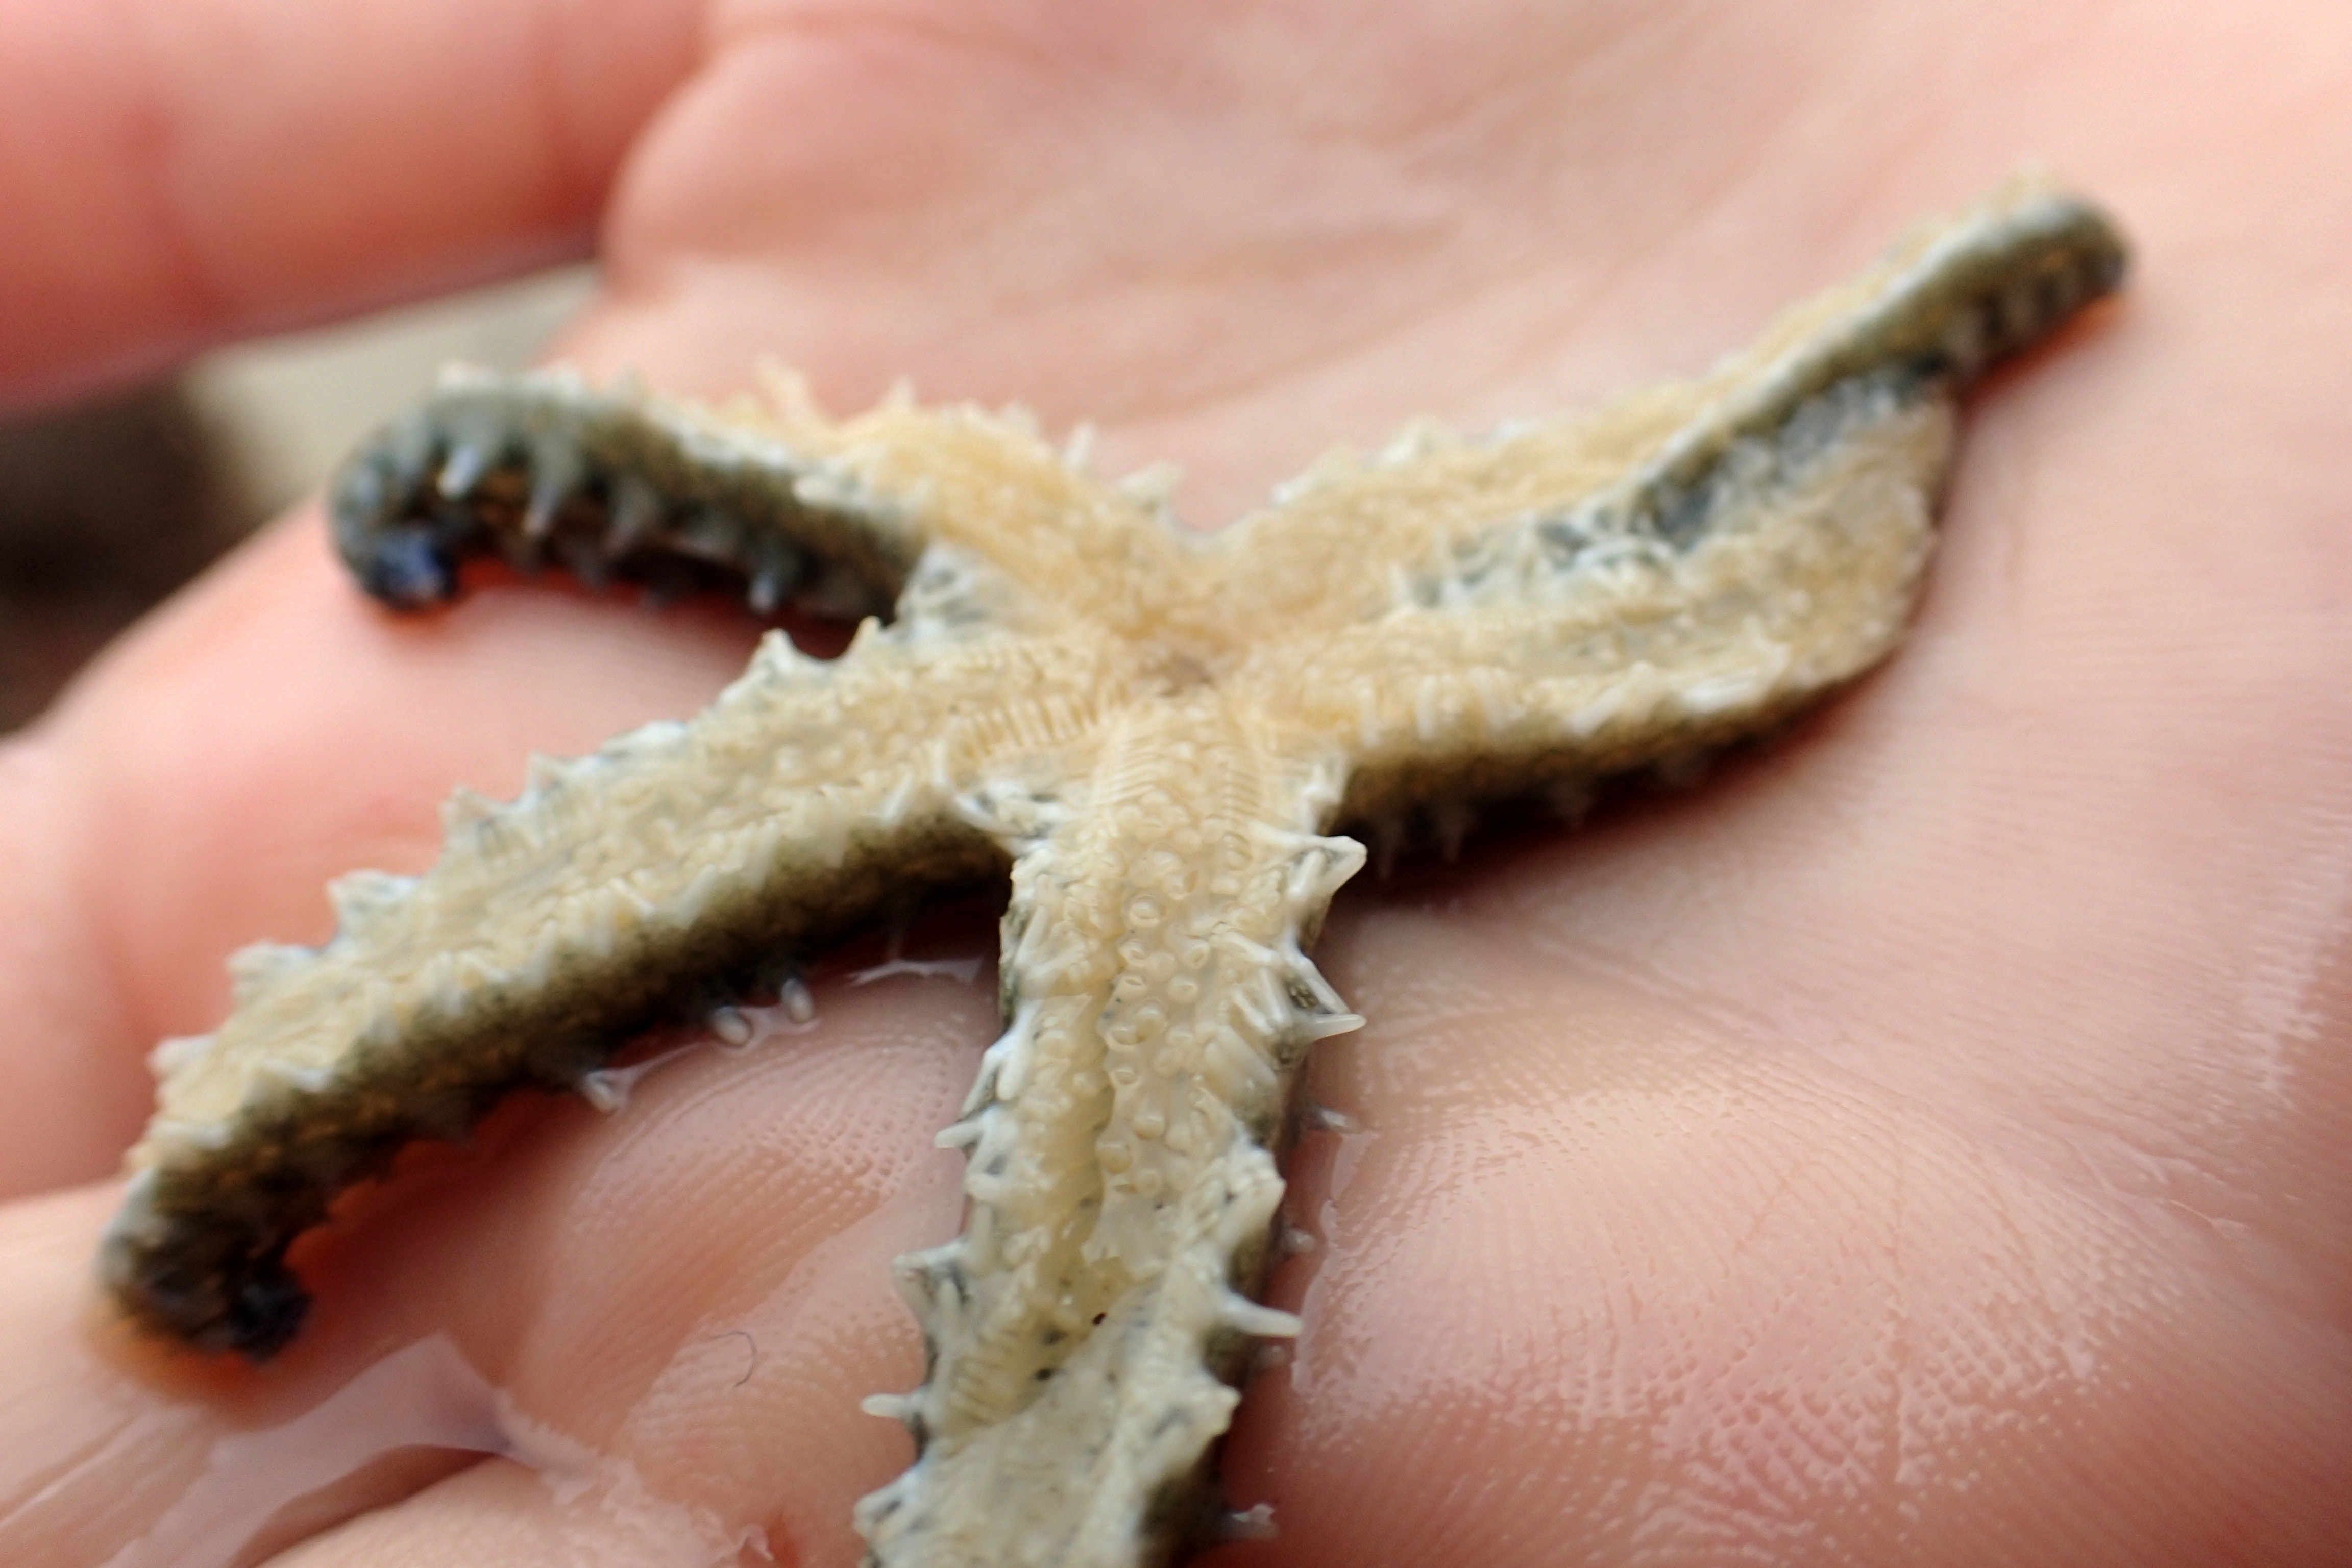 Children love holding starfish - when you turn them over it's easy to see how they move around on their tentacle feet.